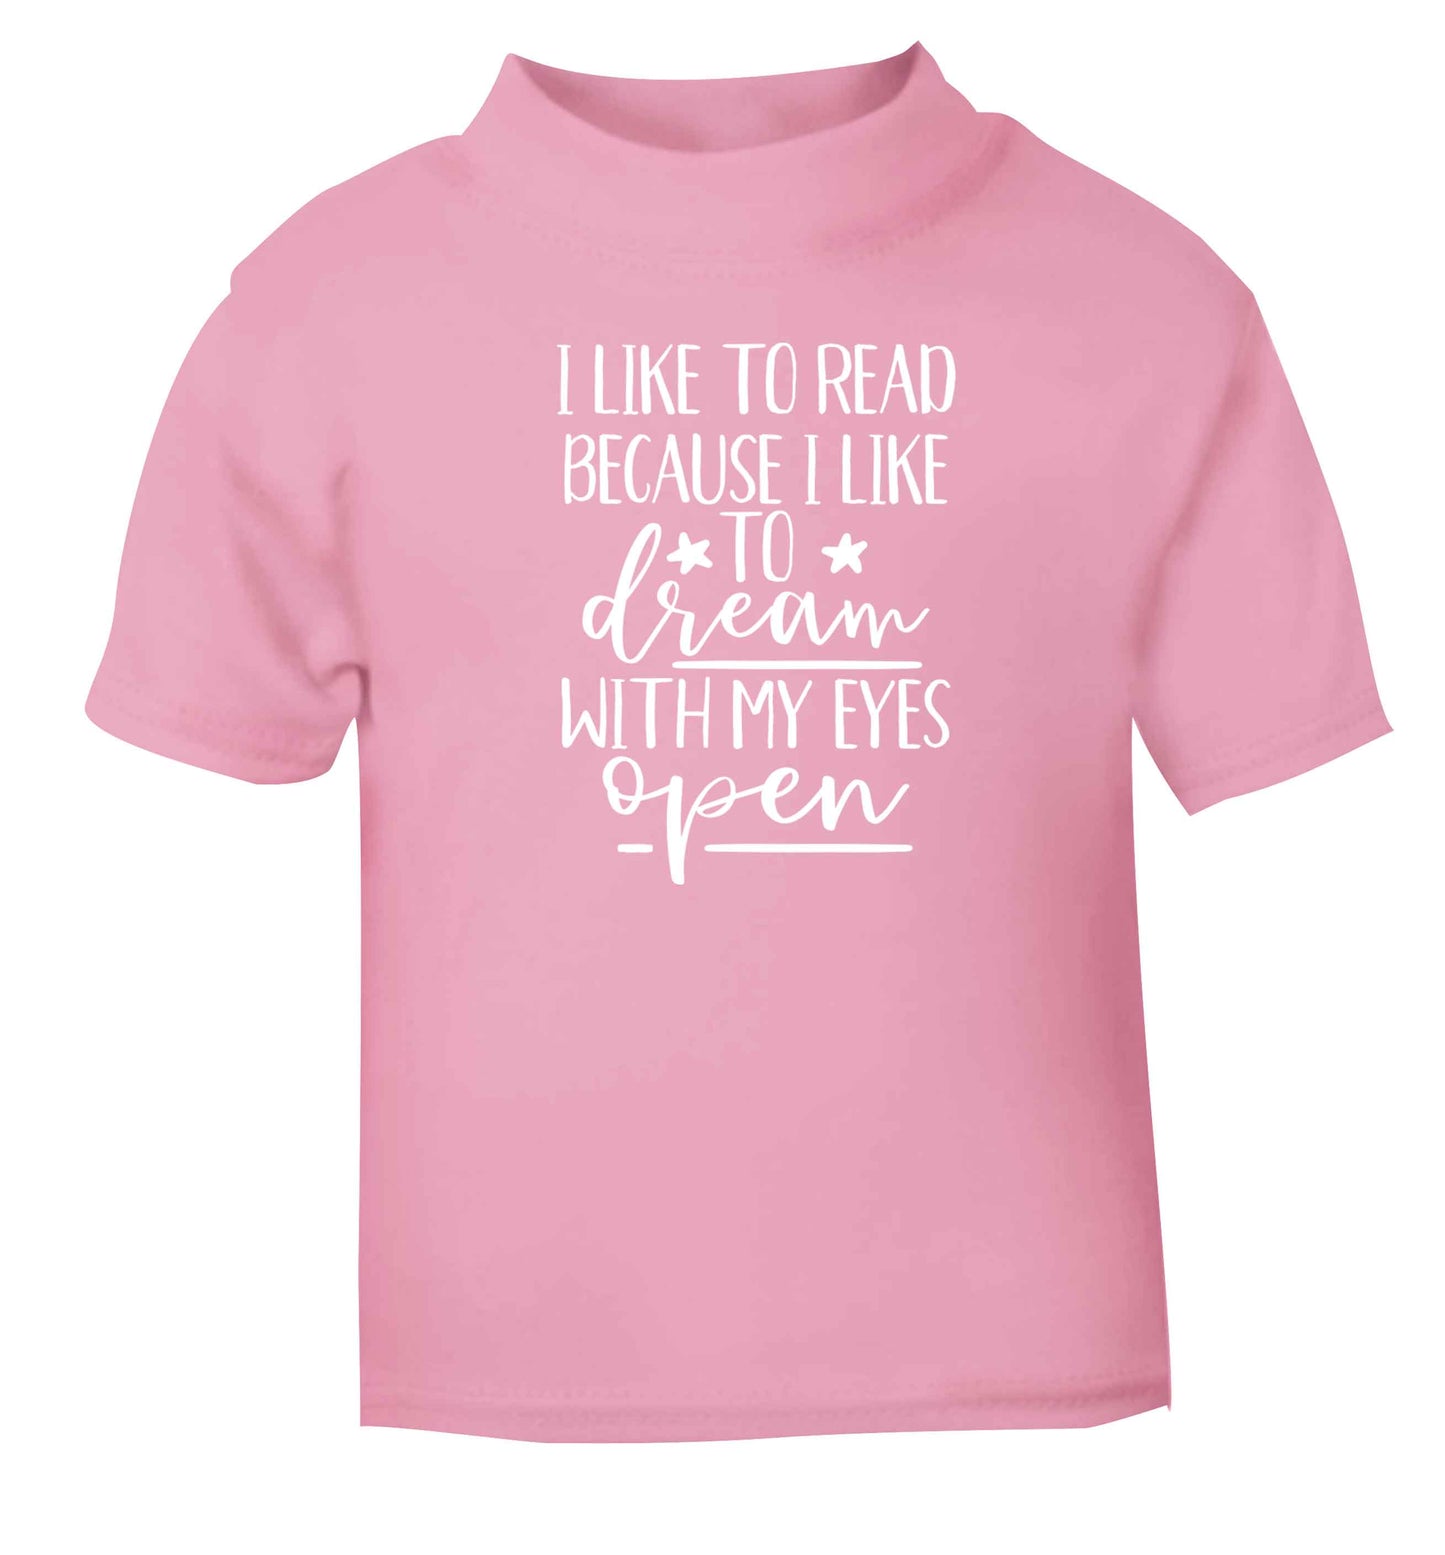 I like to read because I like to dream with my eyes open light pink Baby Toddler Tshirt 2 Years